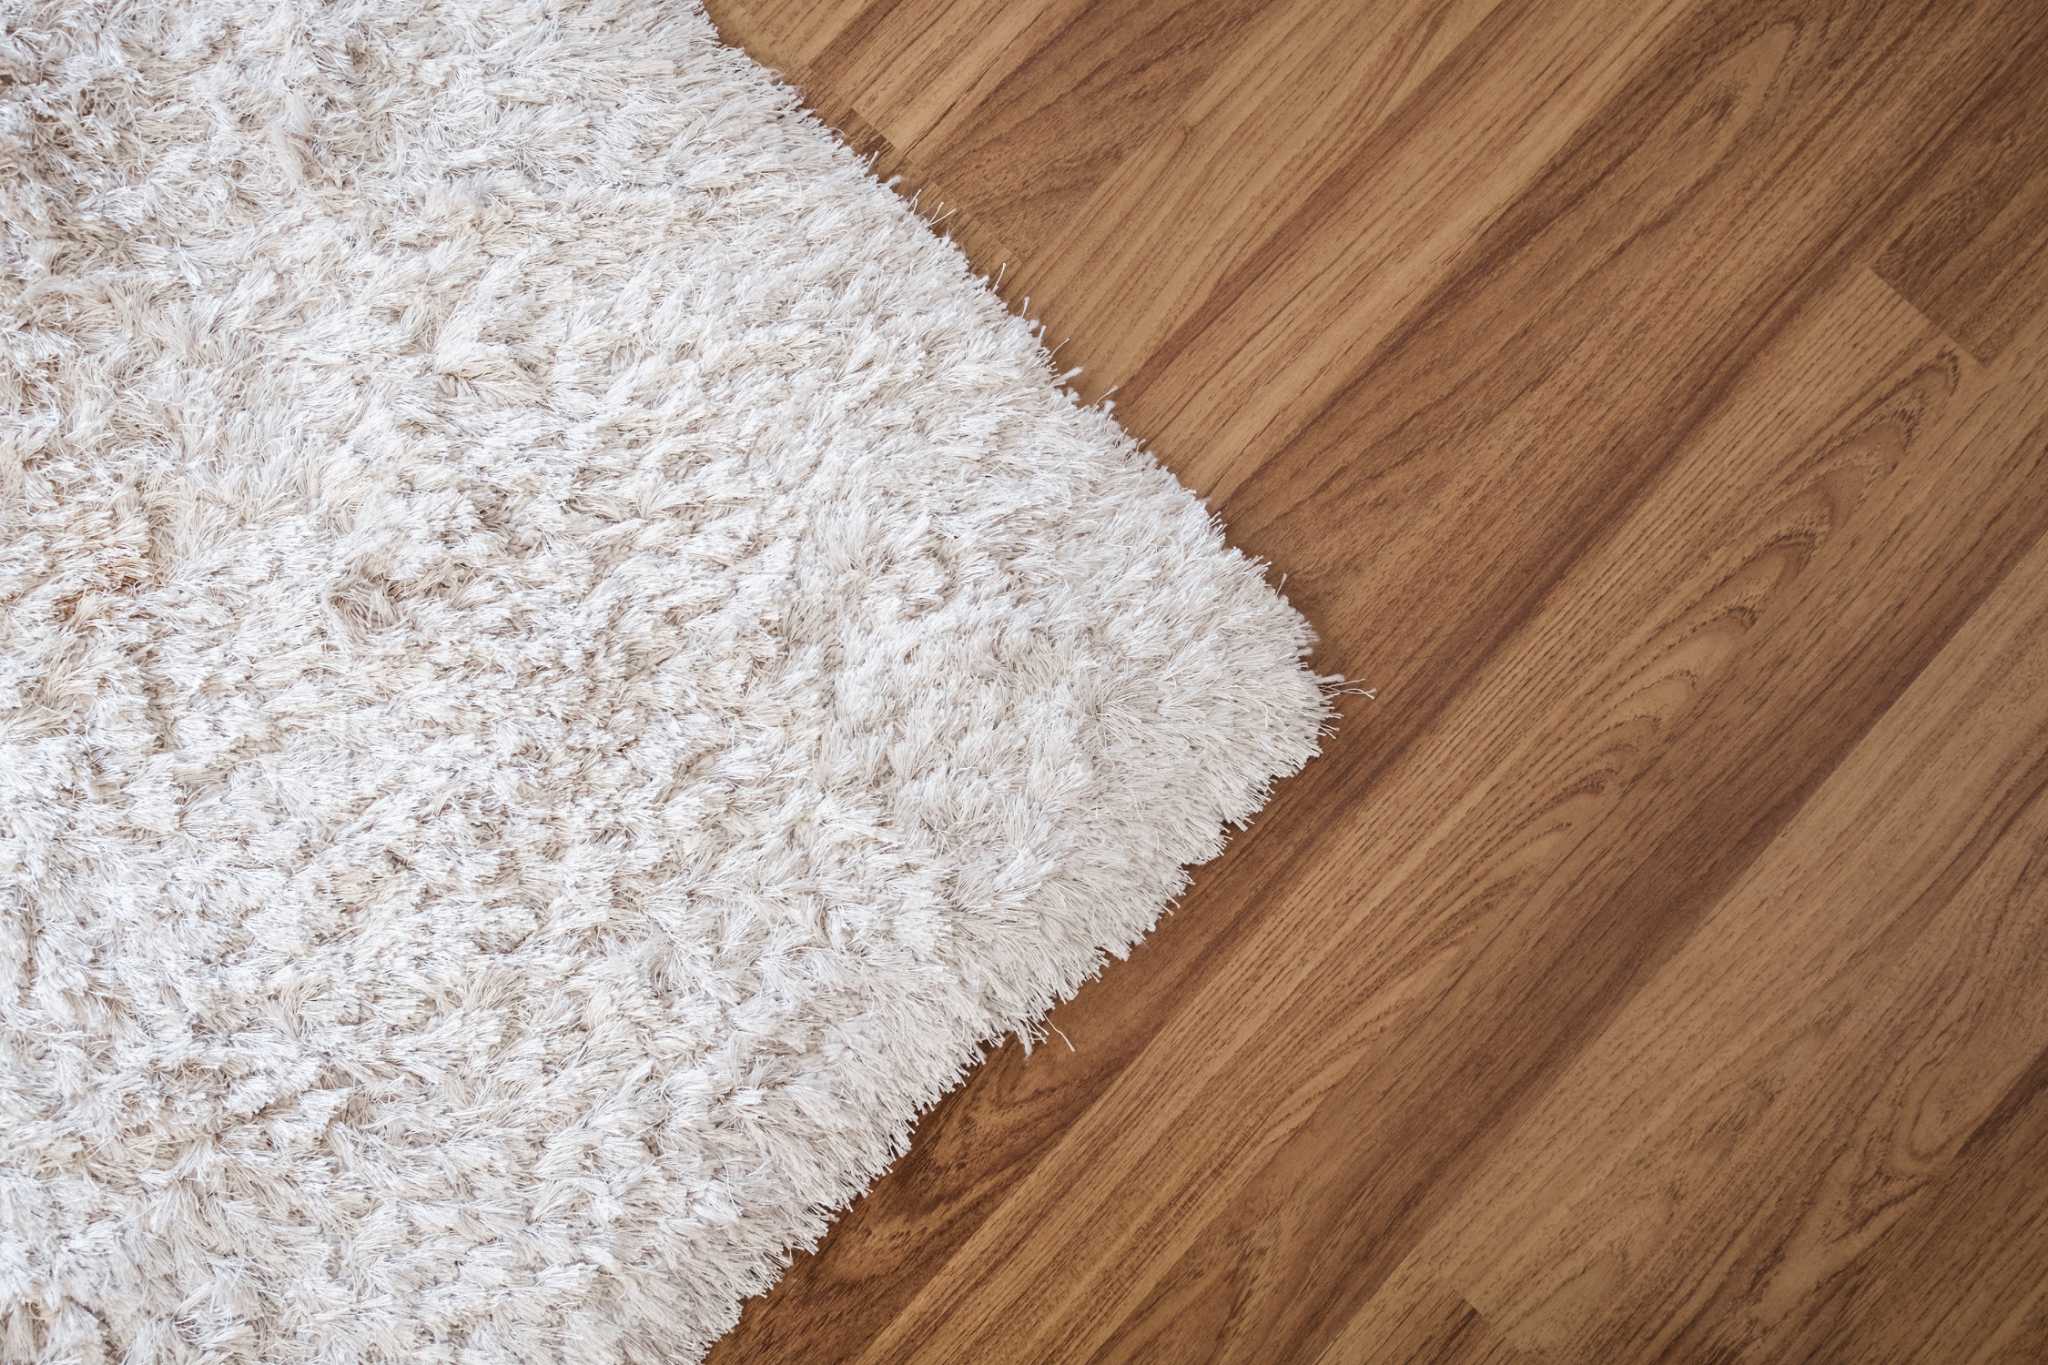 How To Clean Rubber Backed Rugs